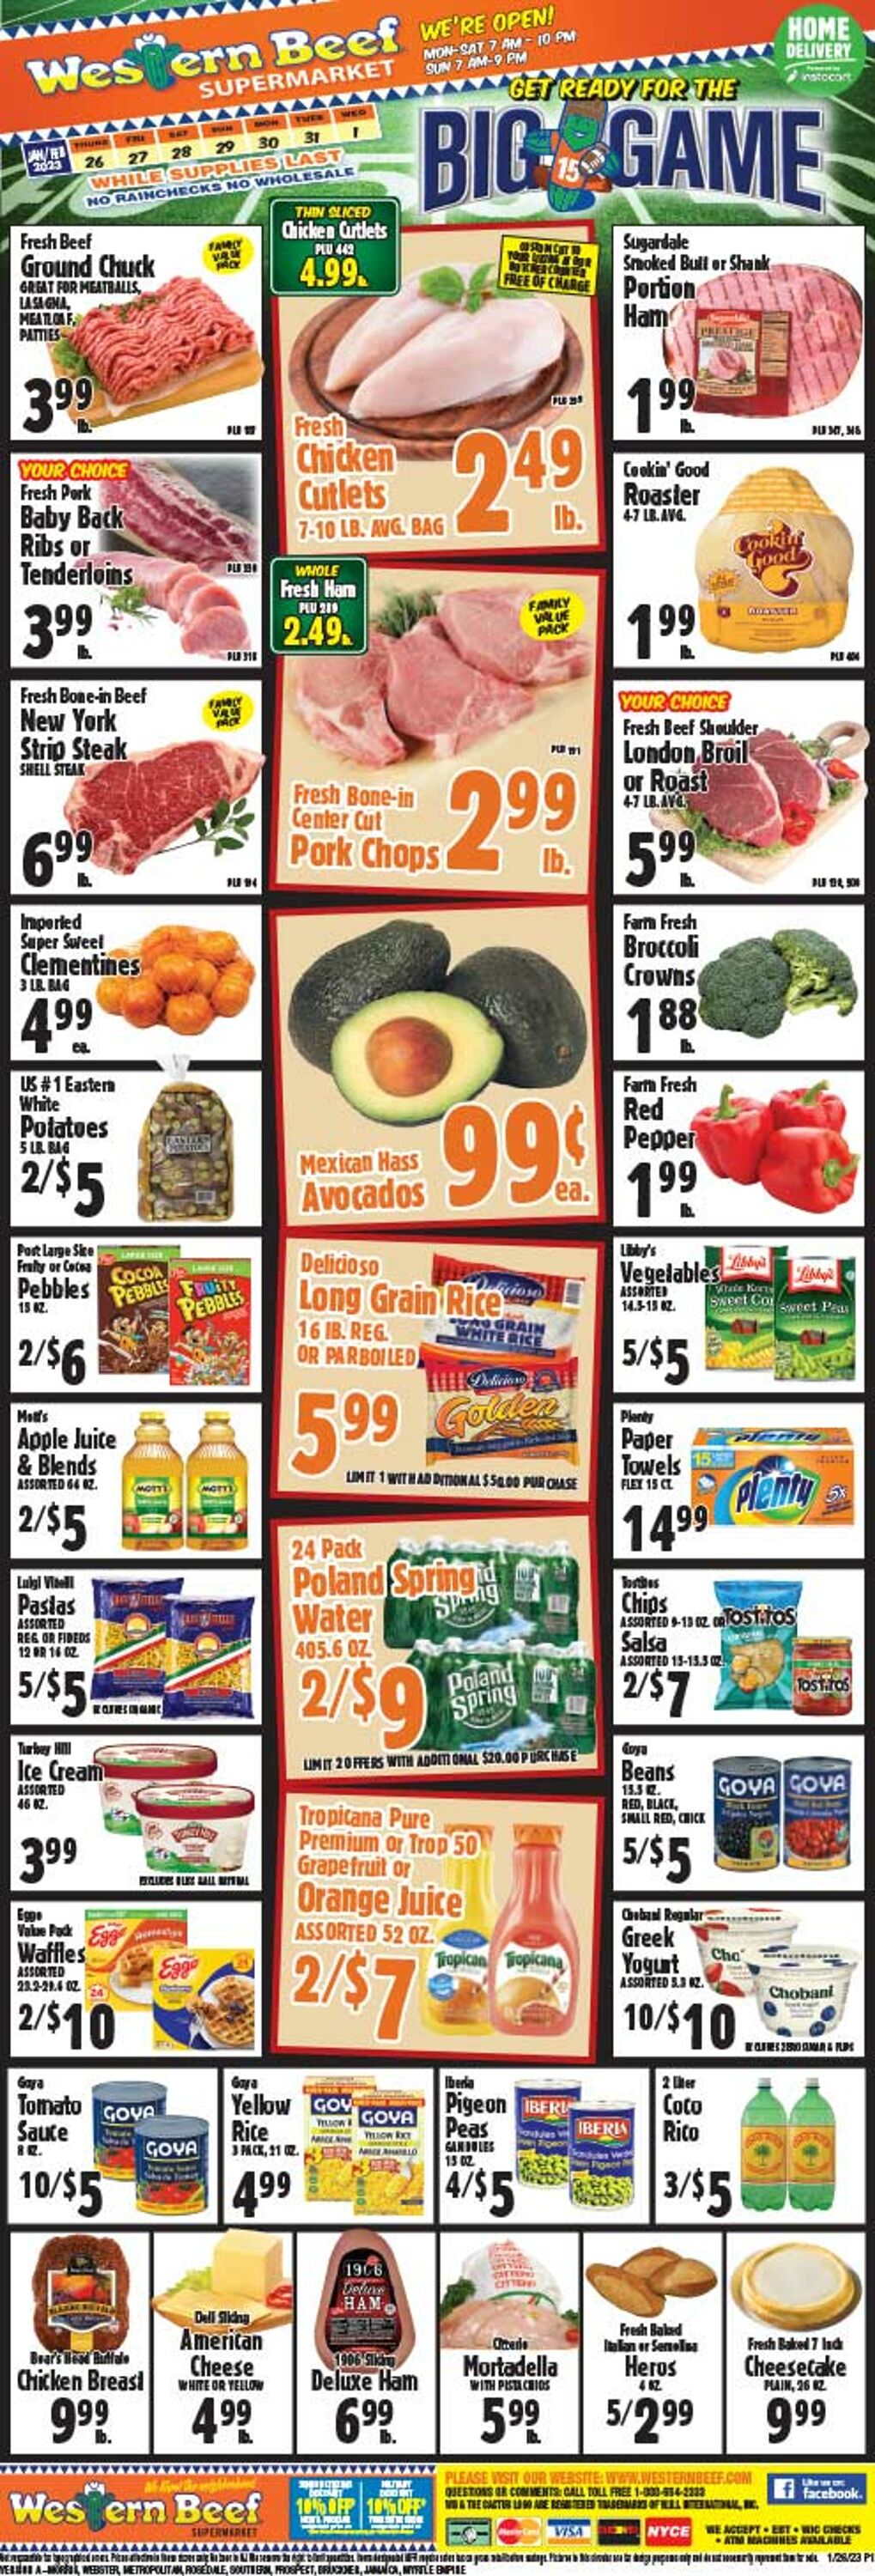 Western Beef Promotional weekly ads